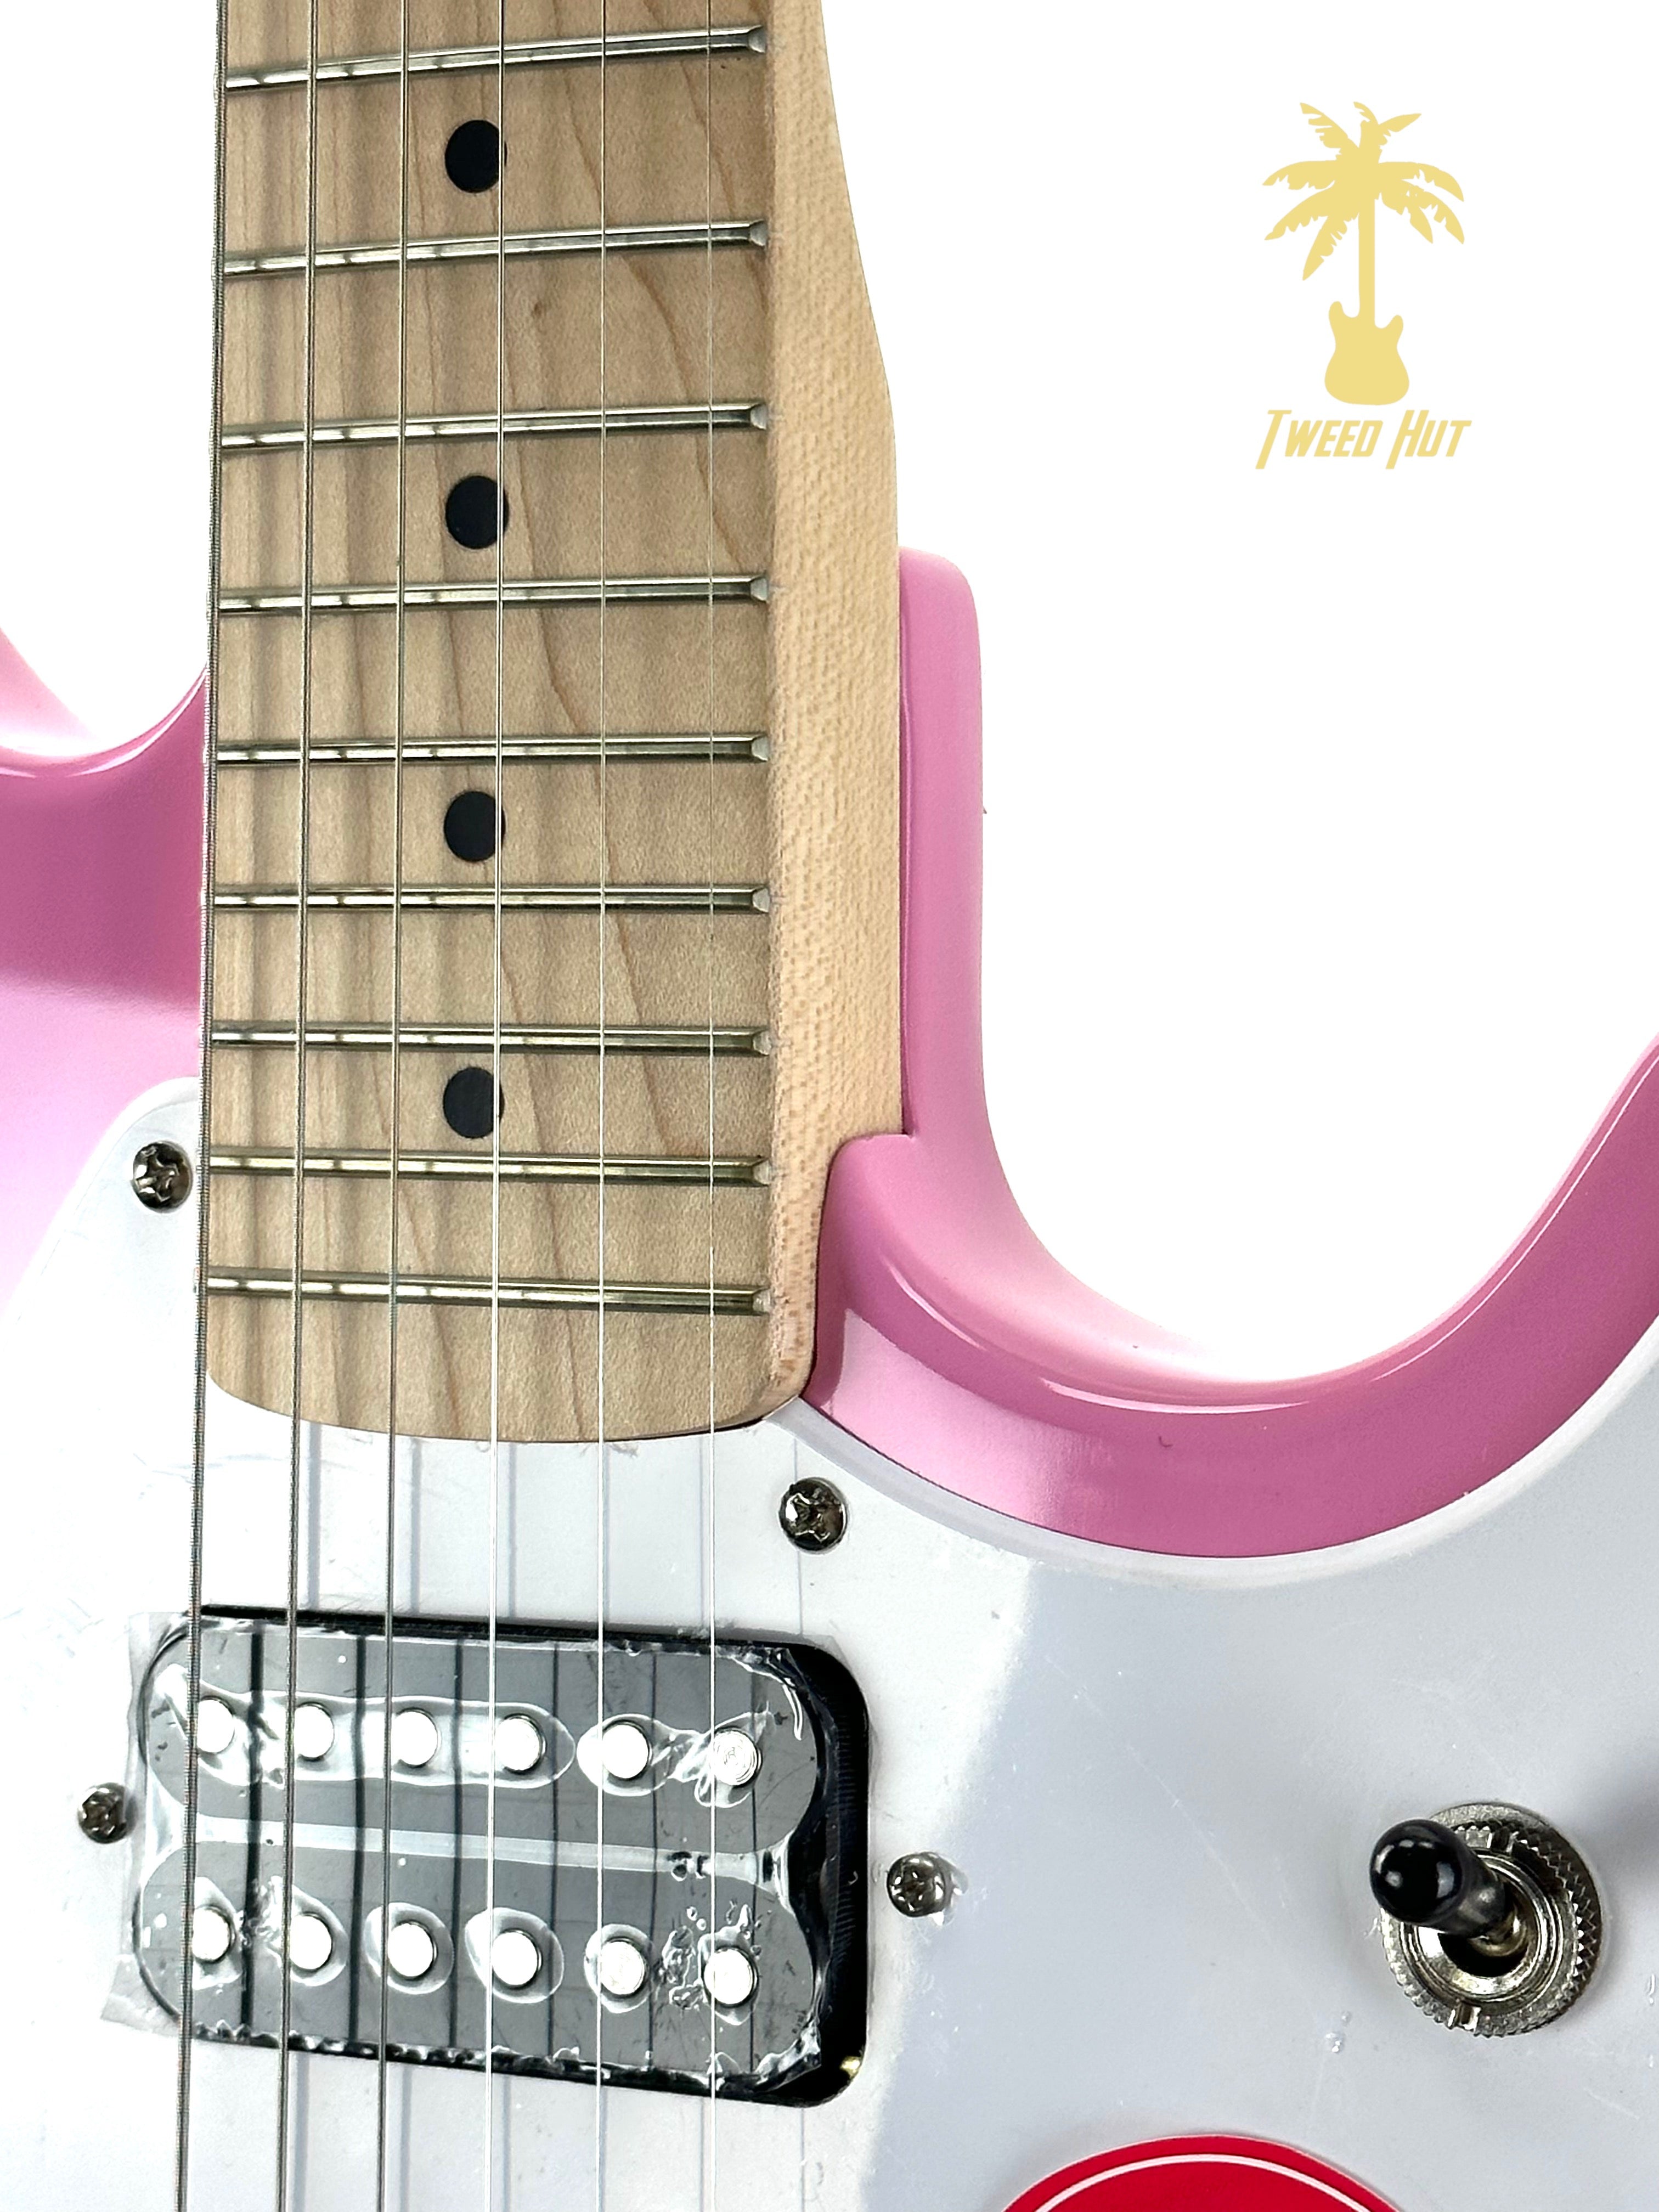 SQUIER SONIC MUSTANG HH - FLASH PINK